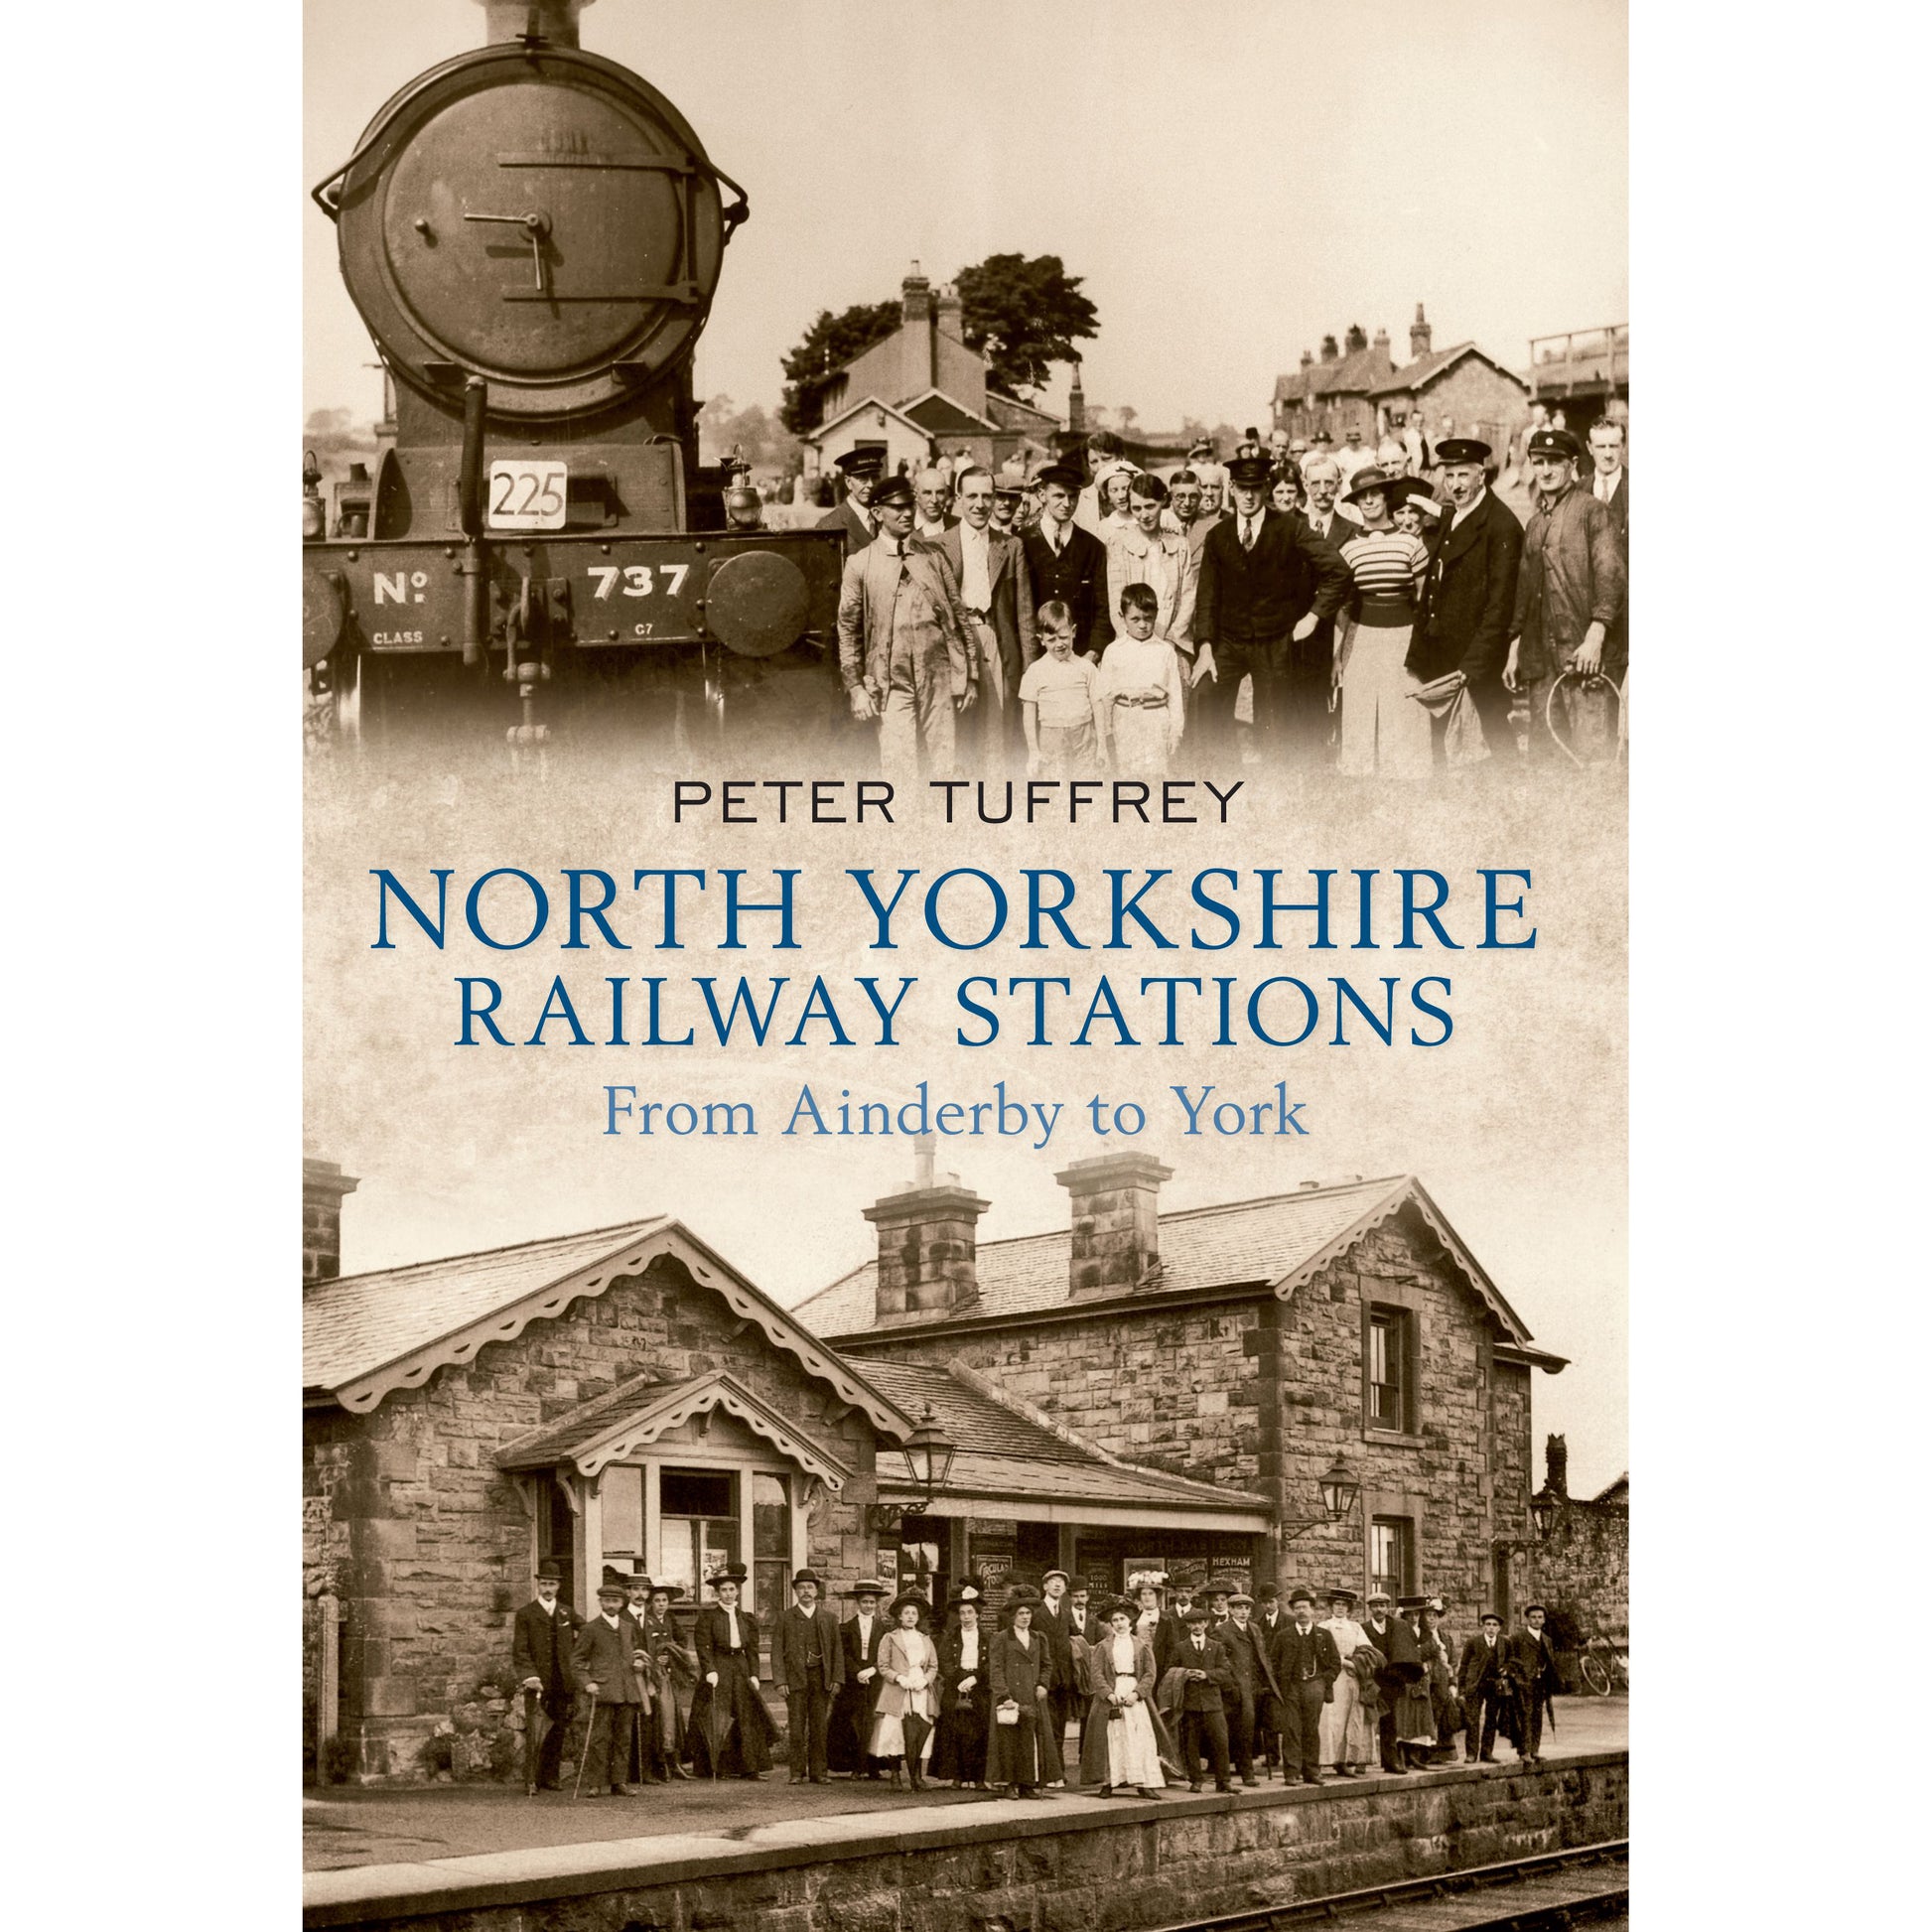 A book cover featuring the book title in the centre and a black and white photograph top and bottom showing images from history.